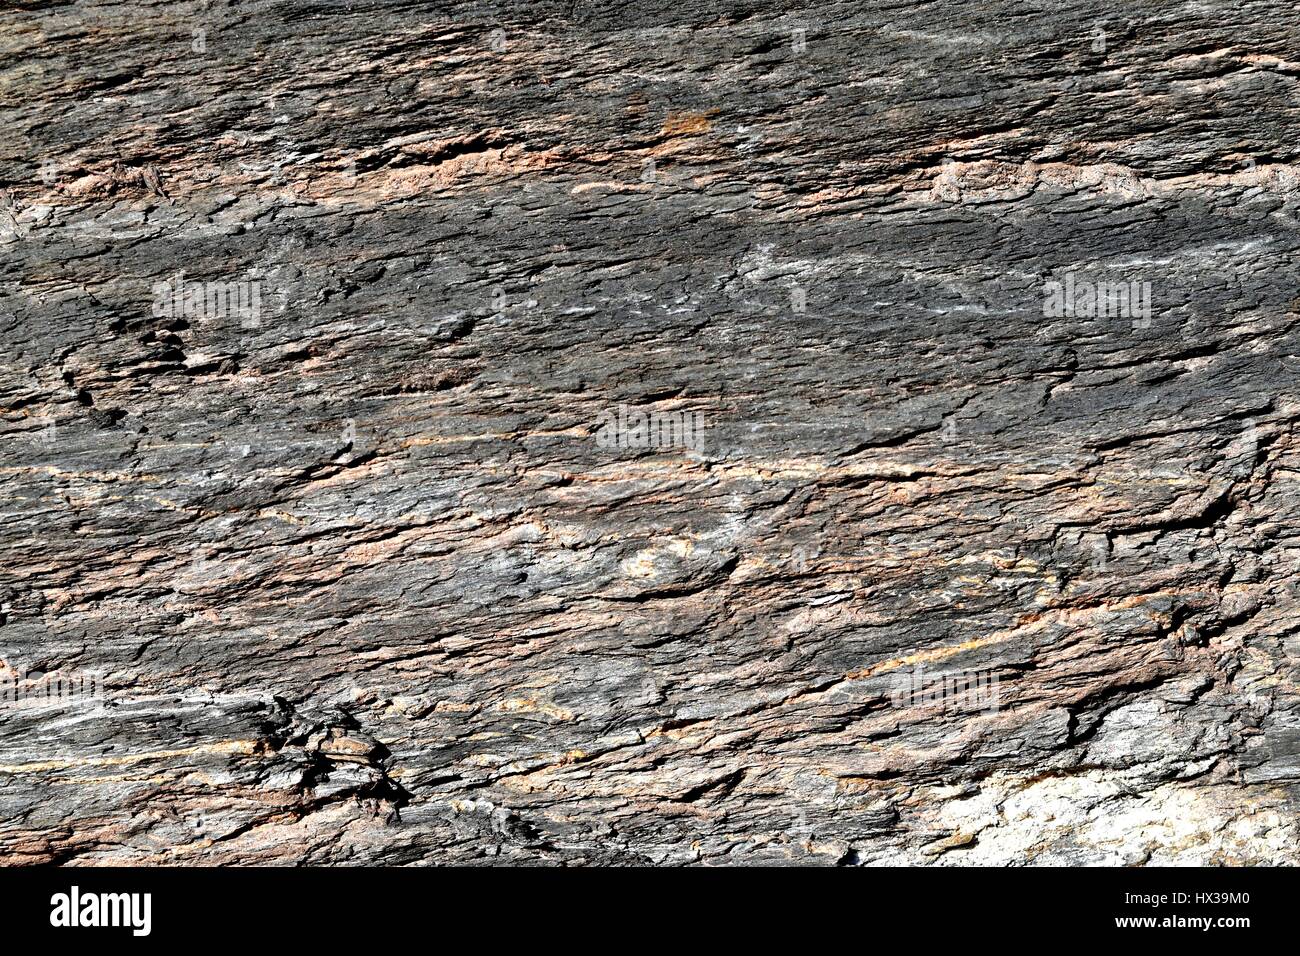 Cracked and weathered shale with calcite streaks and iron staining. Stock Photo